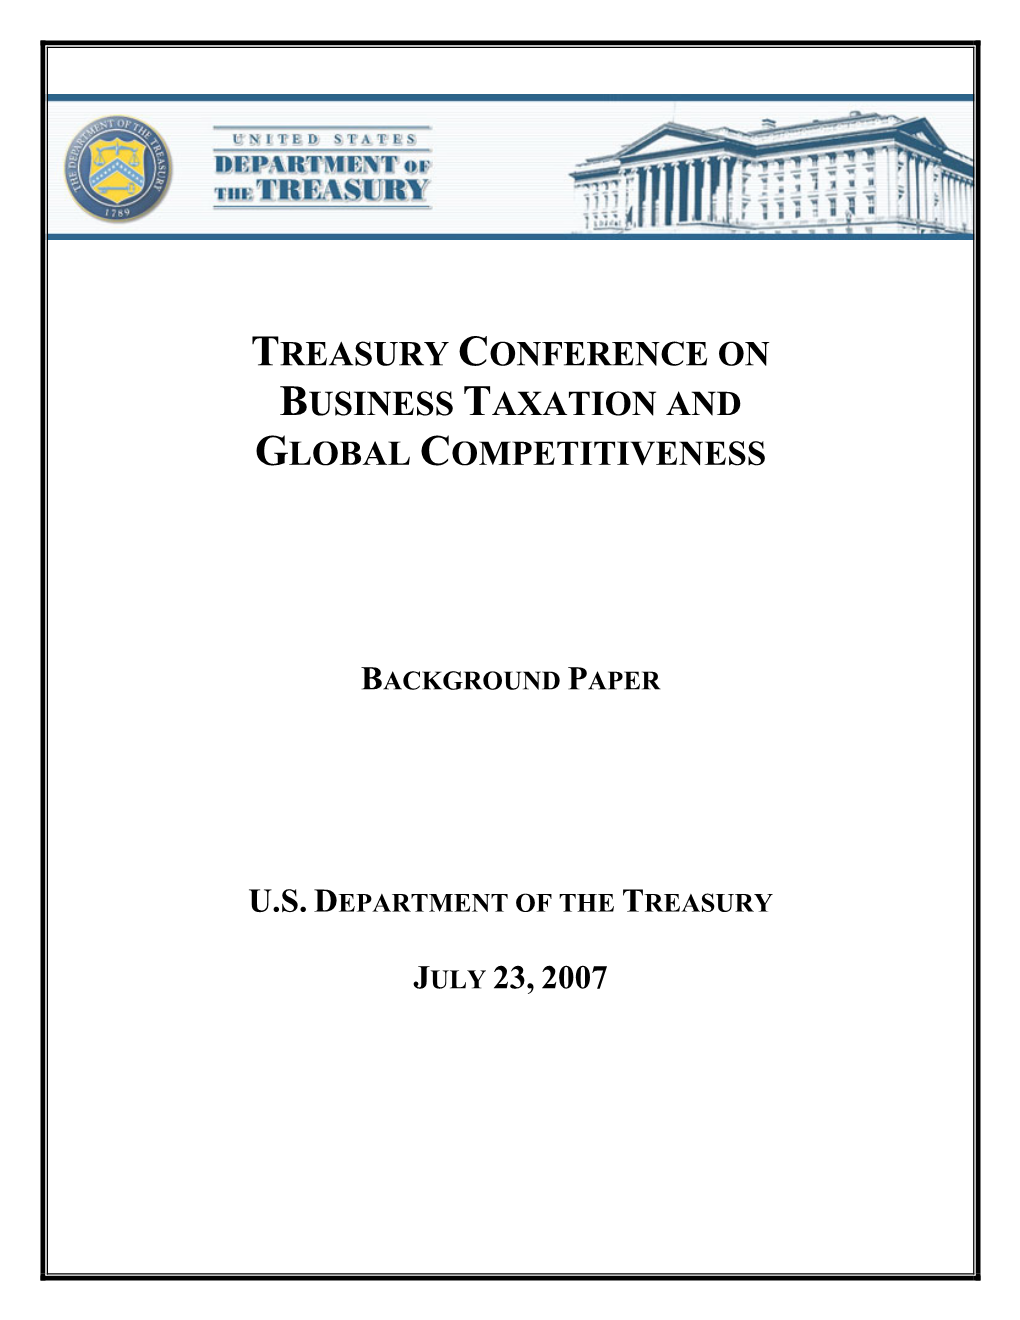 Treasury Conference on Business Taxation and Global Competitiveness